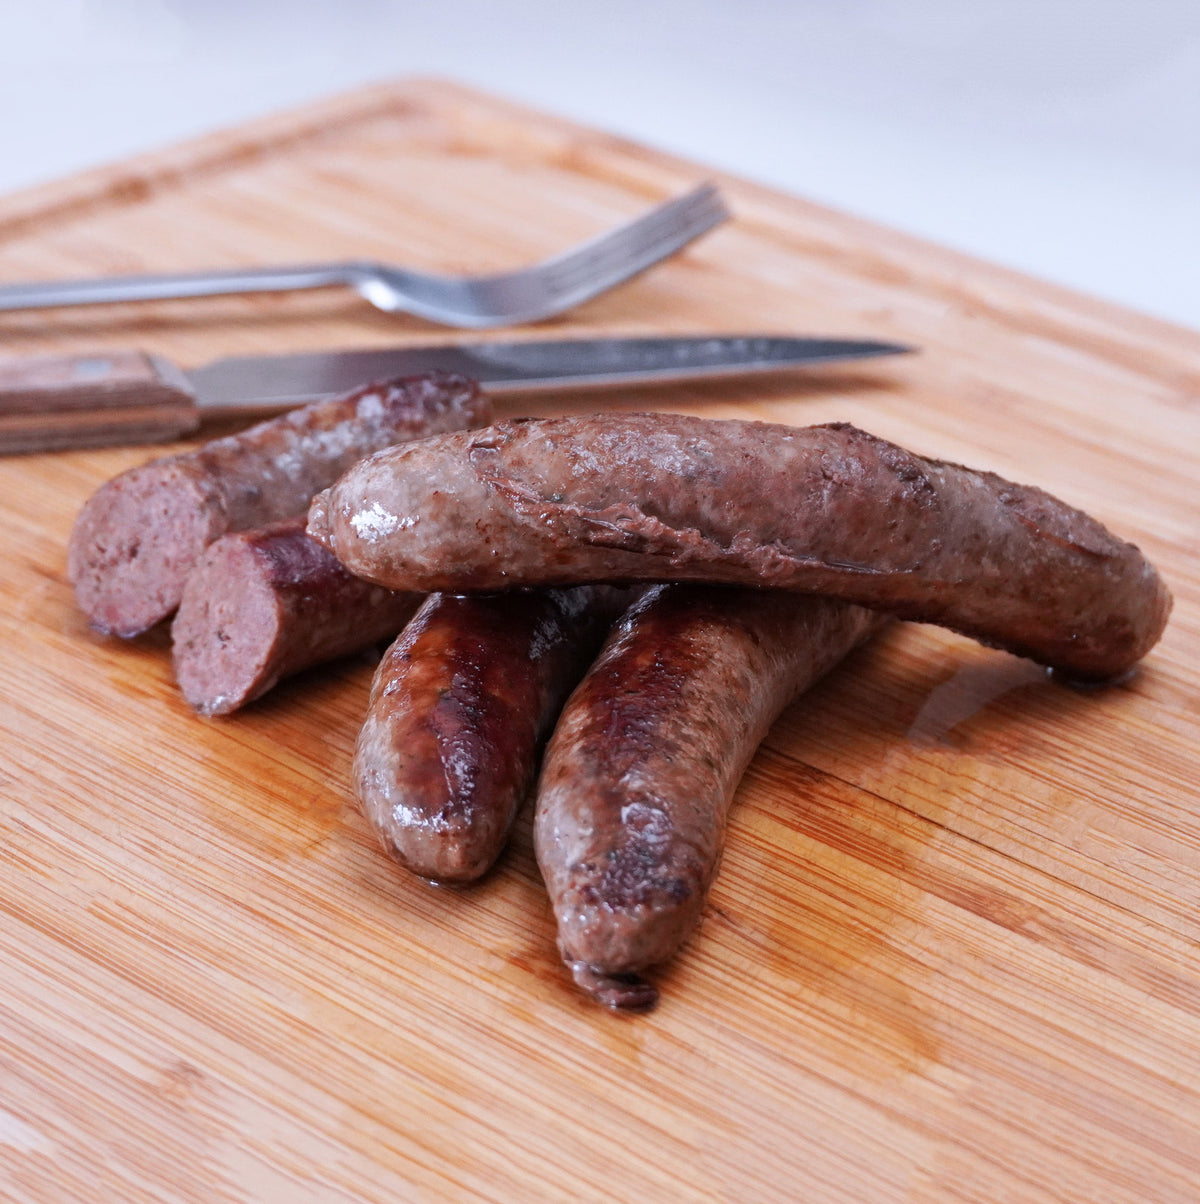 All-Natural Grass-Fed Beef Sausage from New Zealand (240g) - Horizon Farms